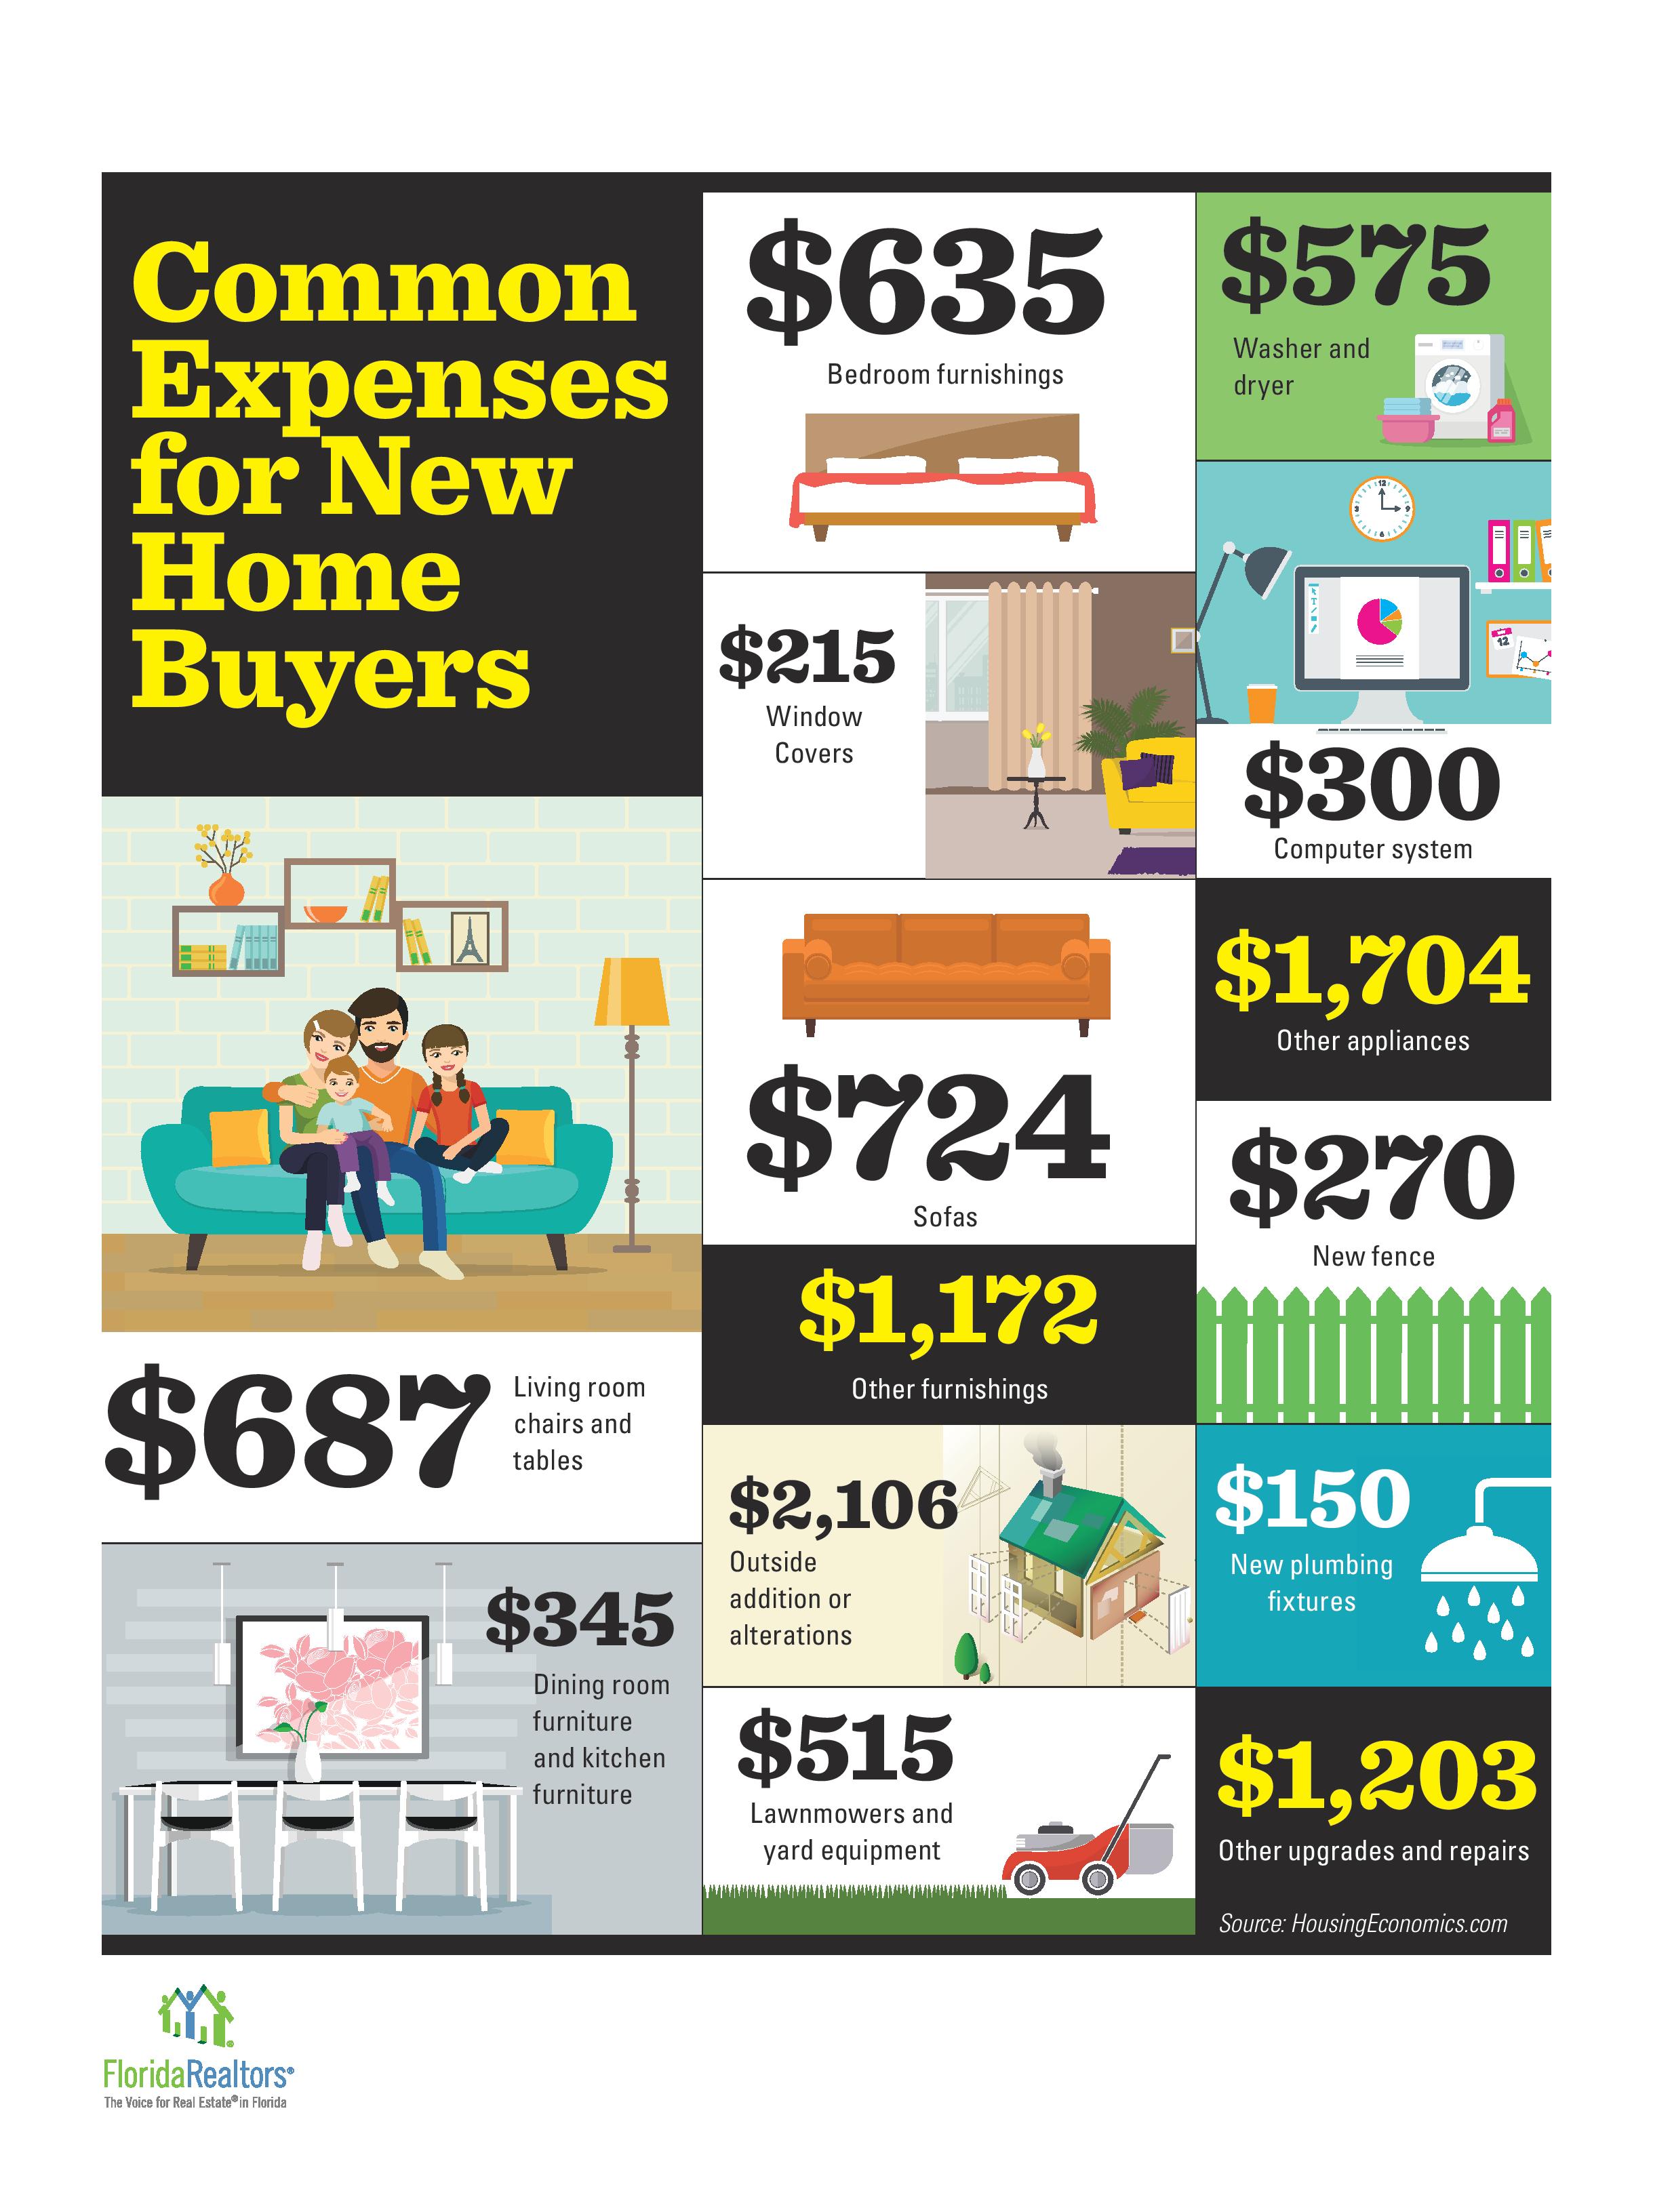 Expenses For New Home Buyers